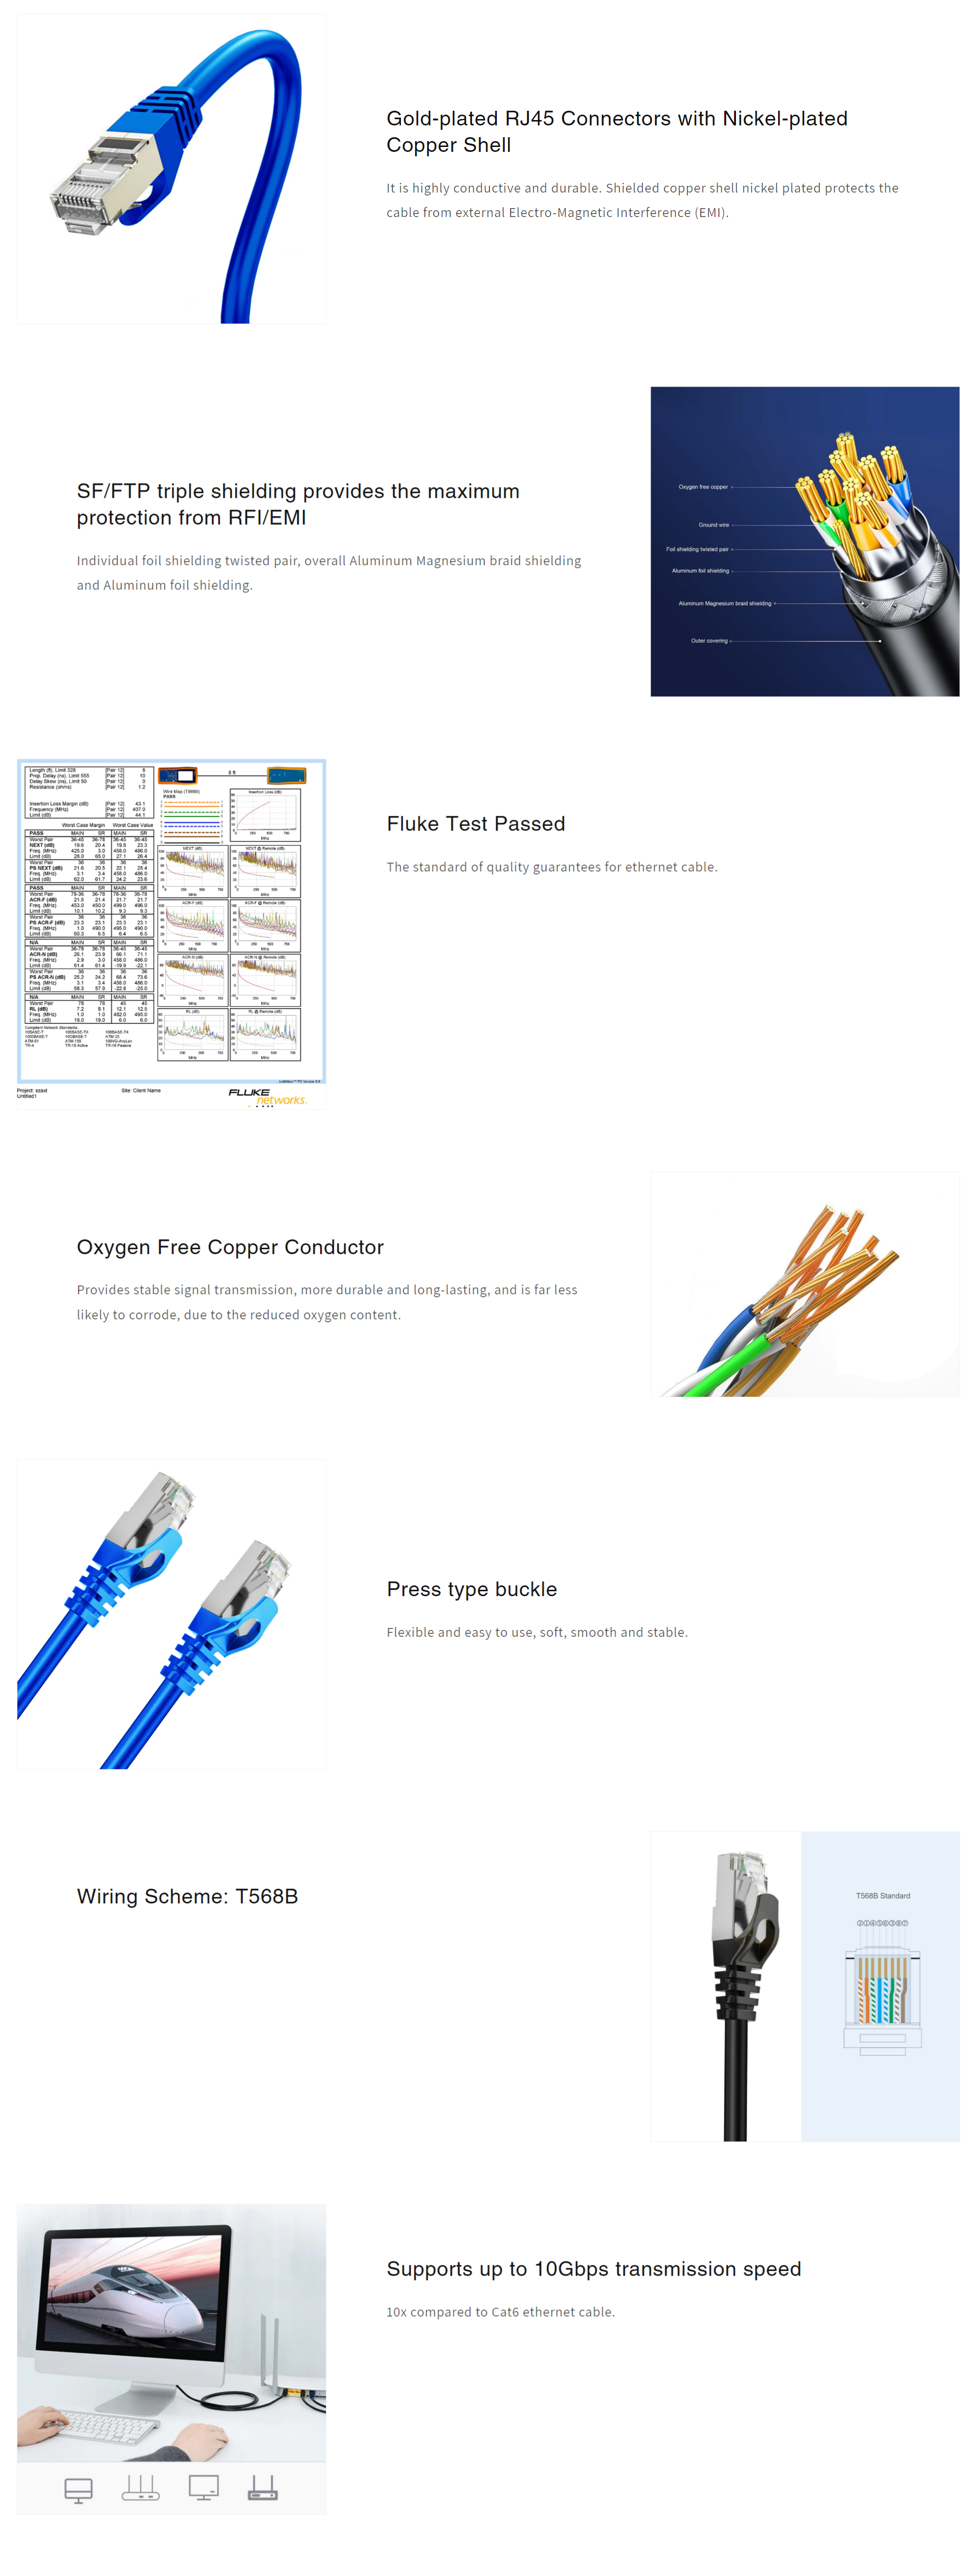 A large marketing image providing additional information about the product Cruxtec Cat7 20m 10GbE SF/FTP Triple Shielding Network Cable Blue - Additional alt info not provided